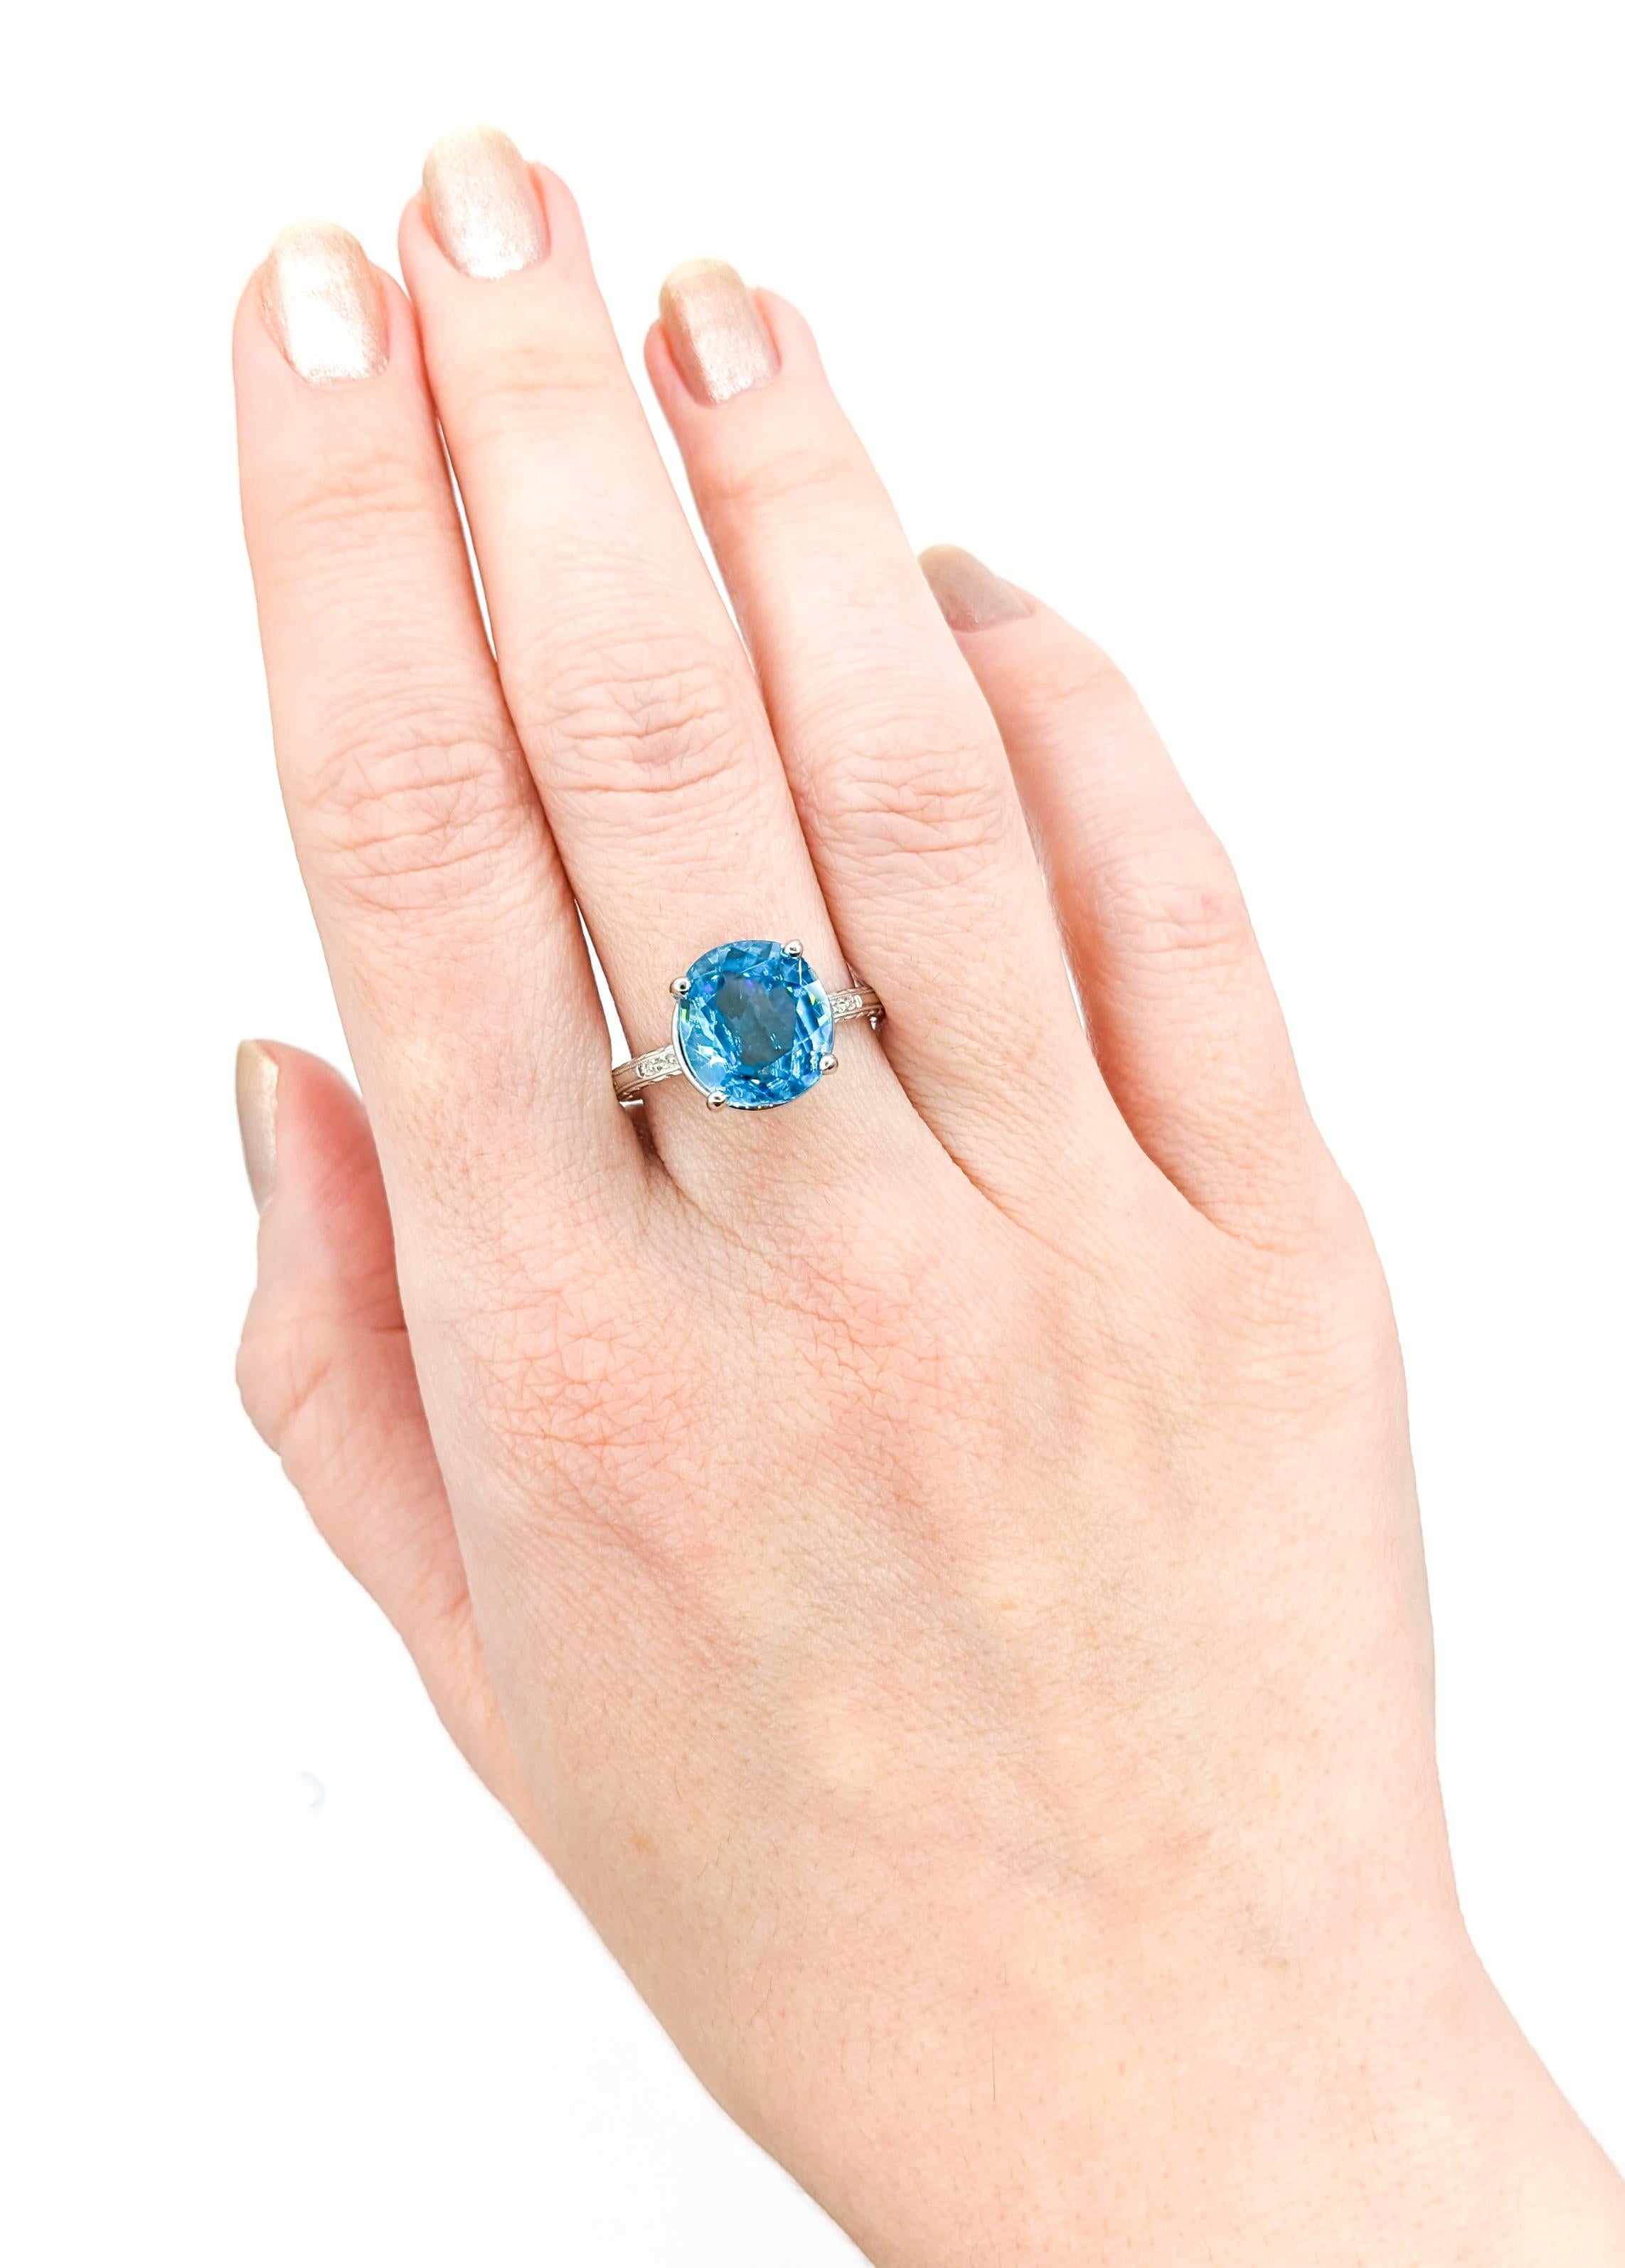 6.3 Carat Blue Zircon & Diamond Ring in White Gold

Expertly crafted in 18 karat white gold, this ring boasts a stunning 6.3ct blue zircon as its centerpiece. The blue zircon is a beautiful medium blue, adding richness to the ring. Currently in size